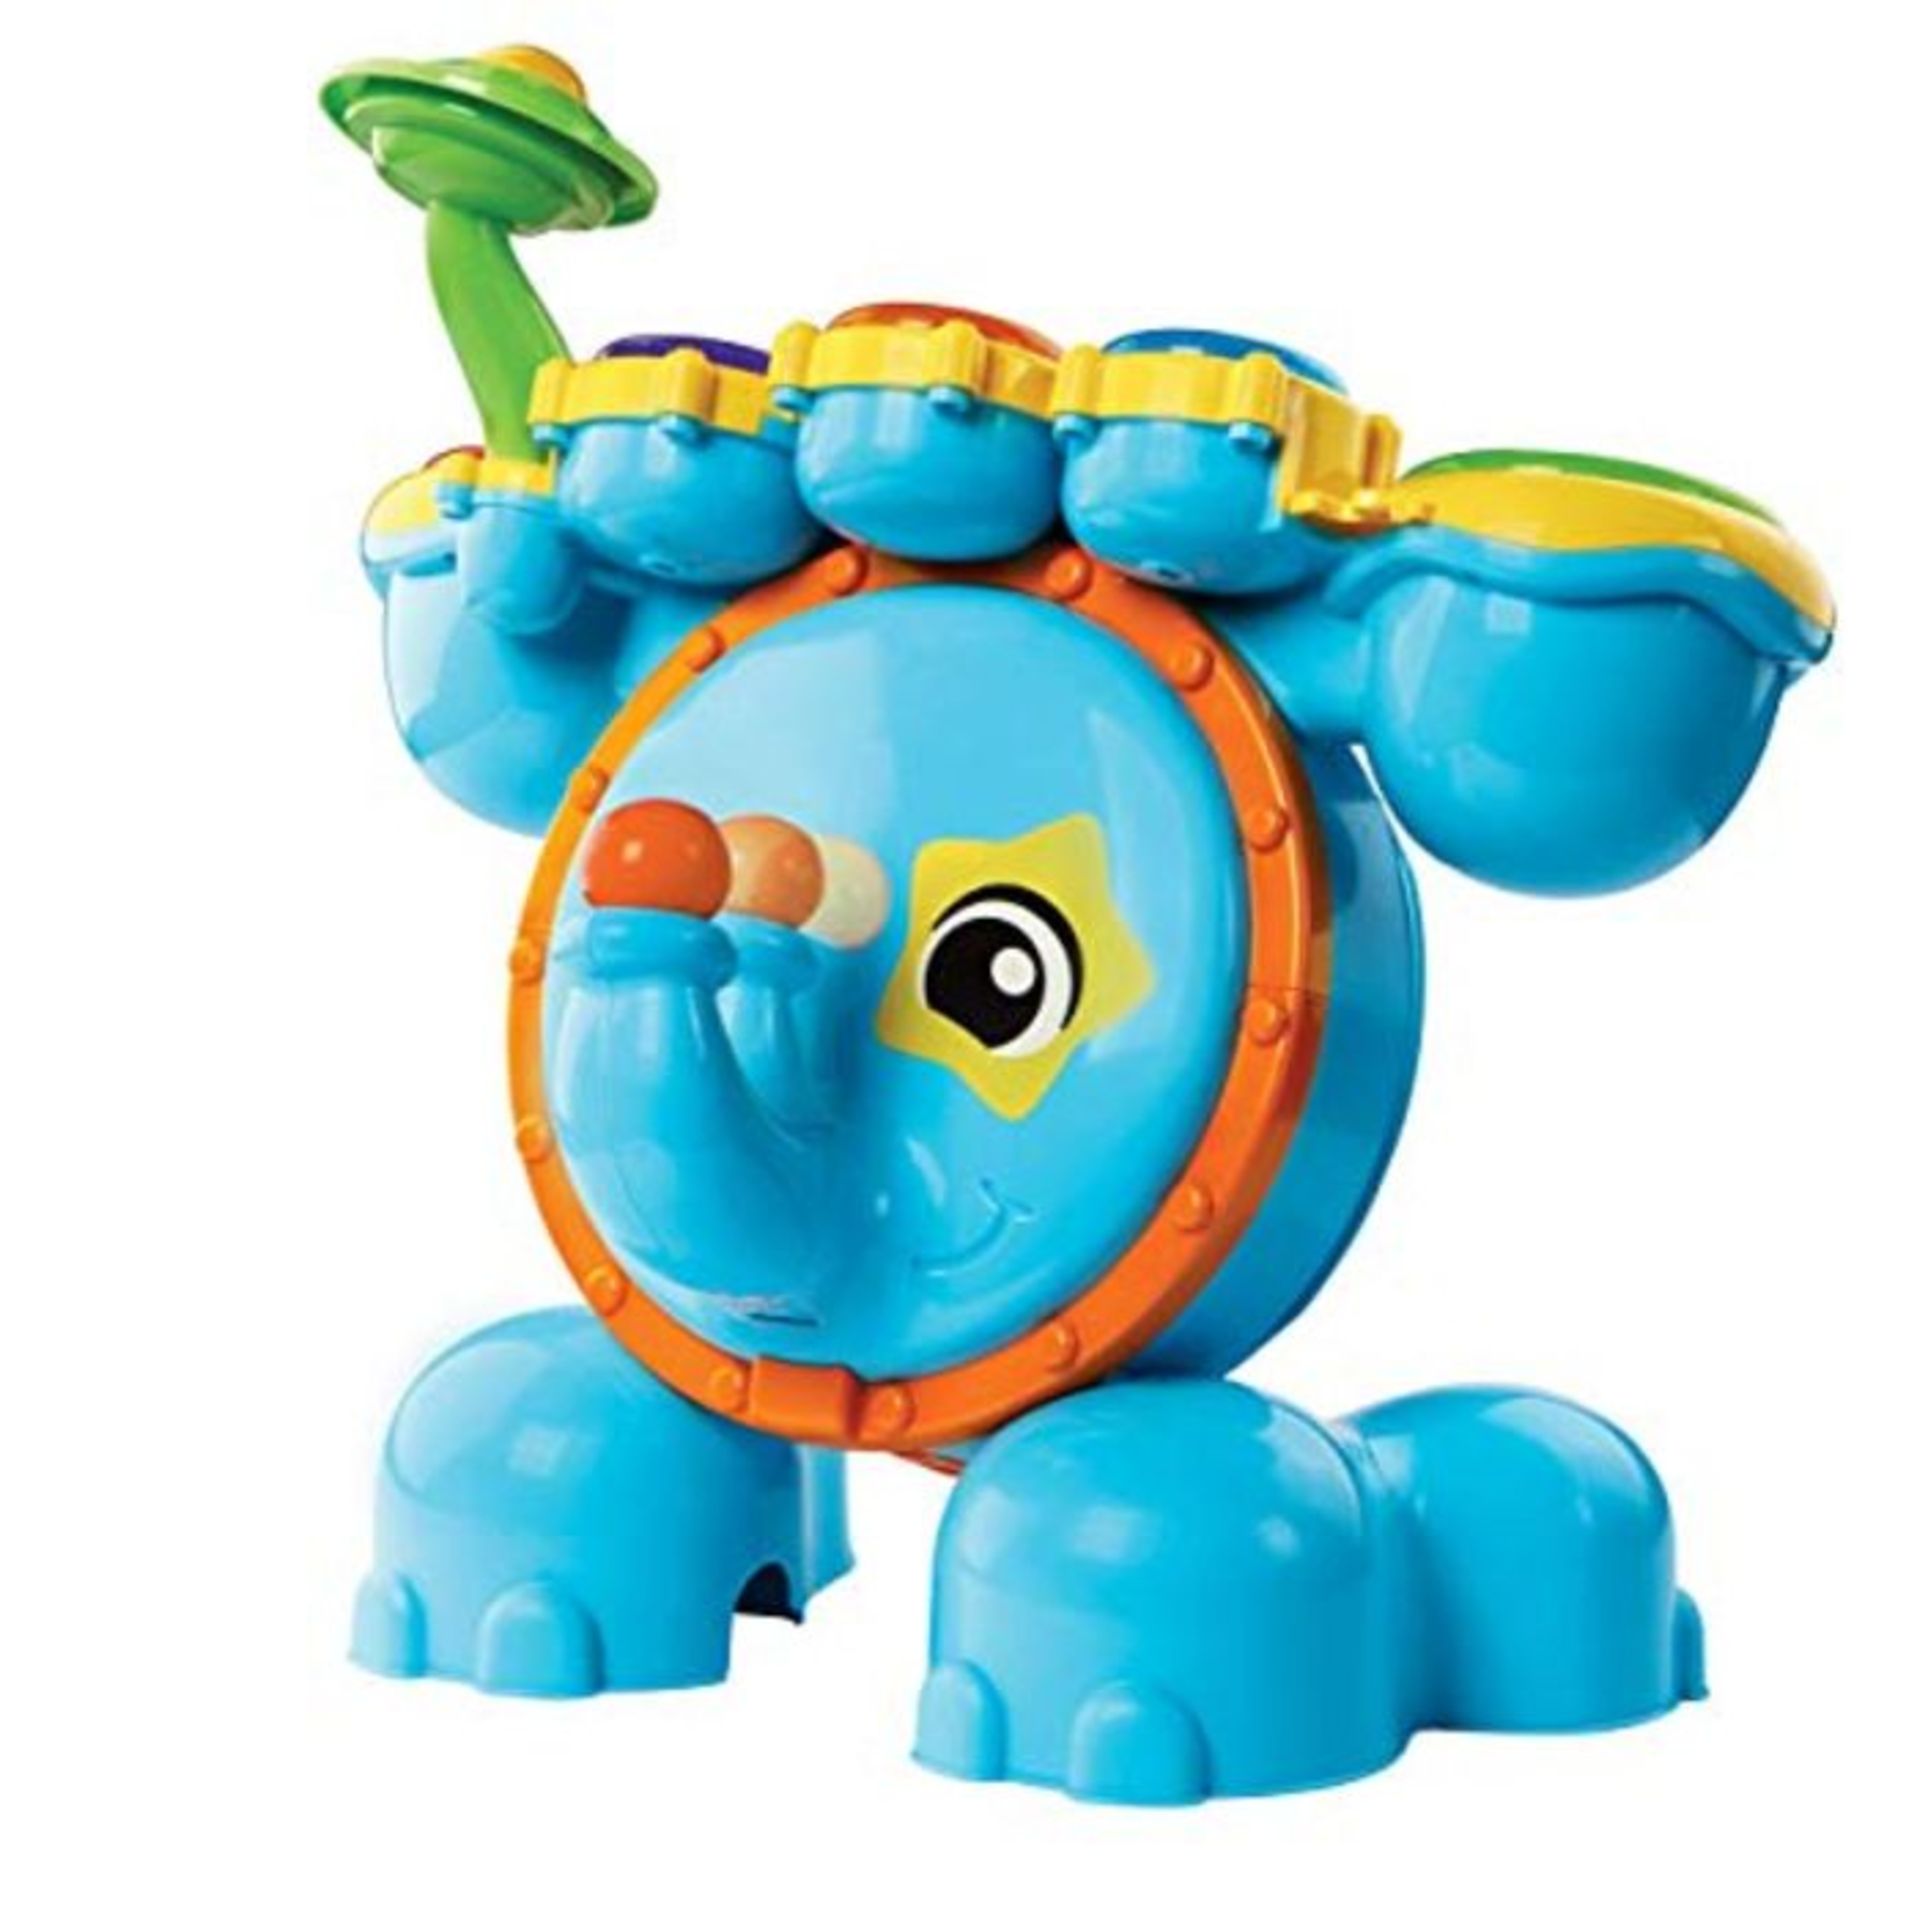 VTech Blue la Batería Multirritmo Interactive Learning Music, with Activities That En